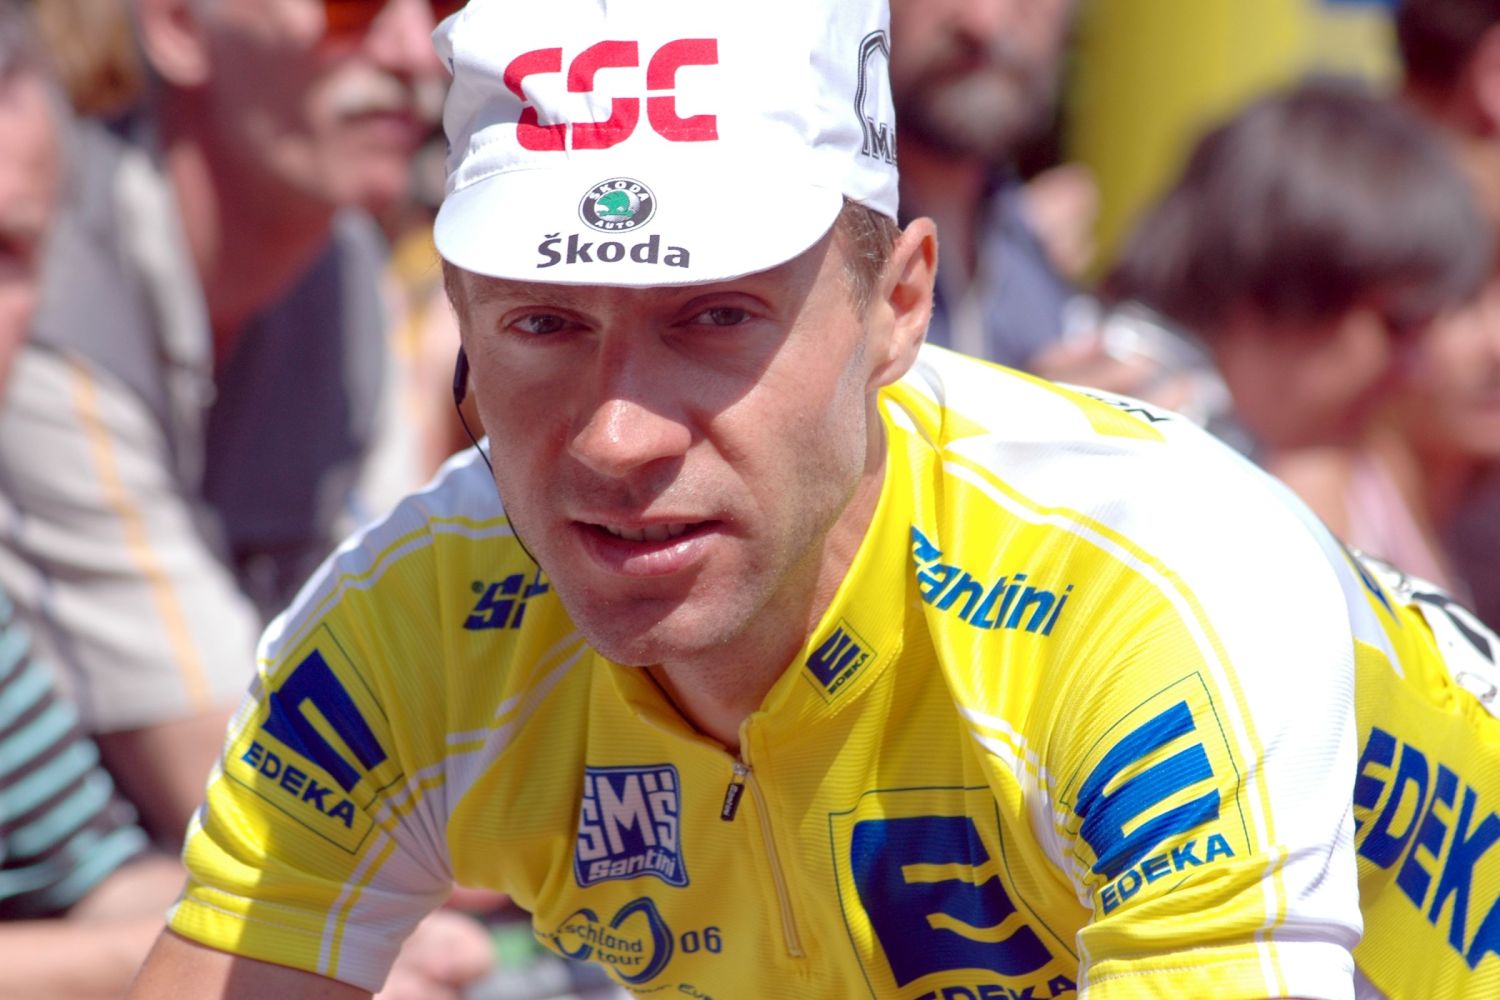 43-Year-Old German Cyclist Jens Voigt Breaks World Hour Record…. Then Promptly Retires On Top!